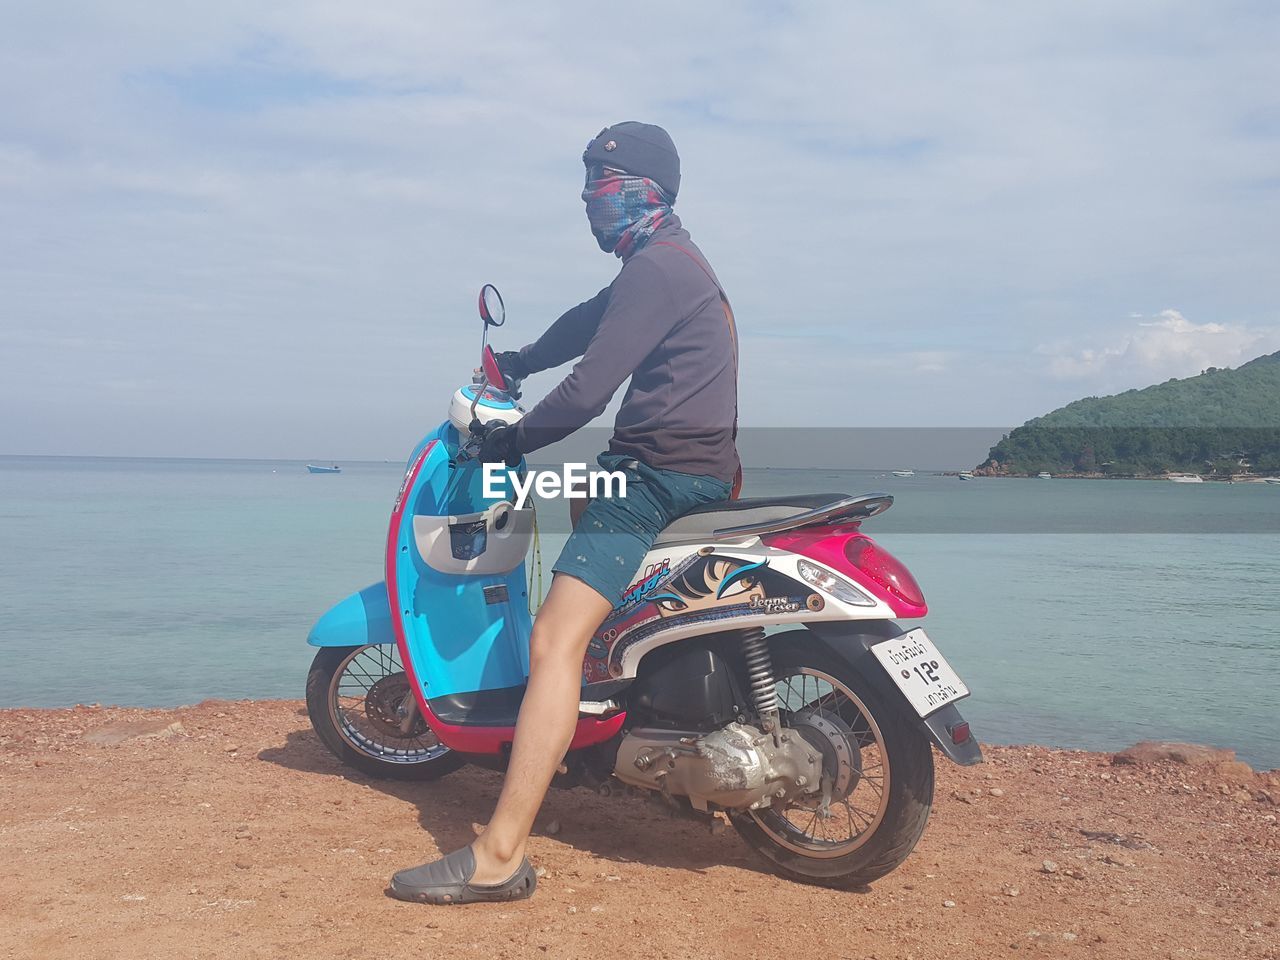 MAN RIDING MOTORCYCLE AGAINST SEA